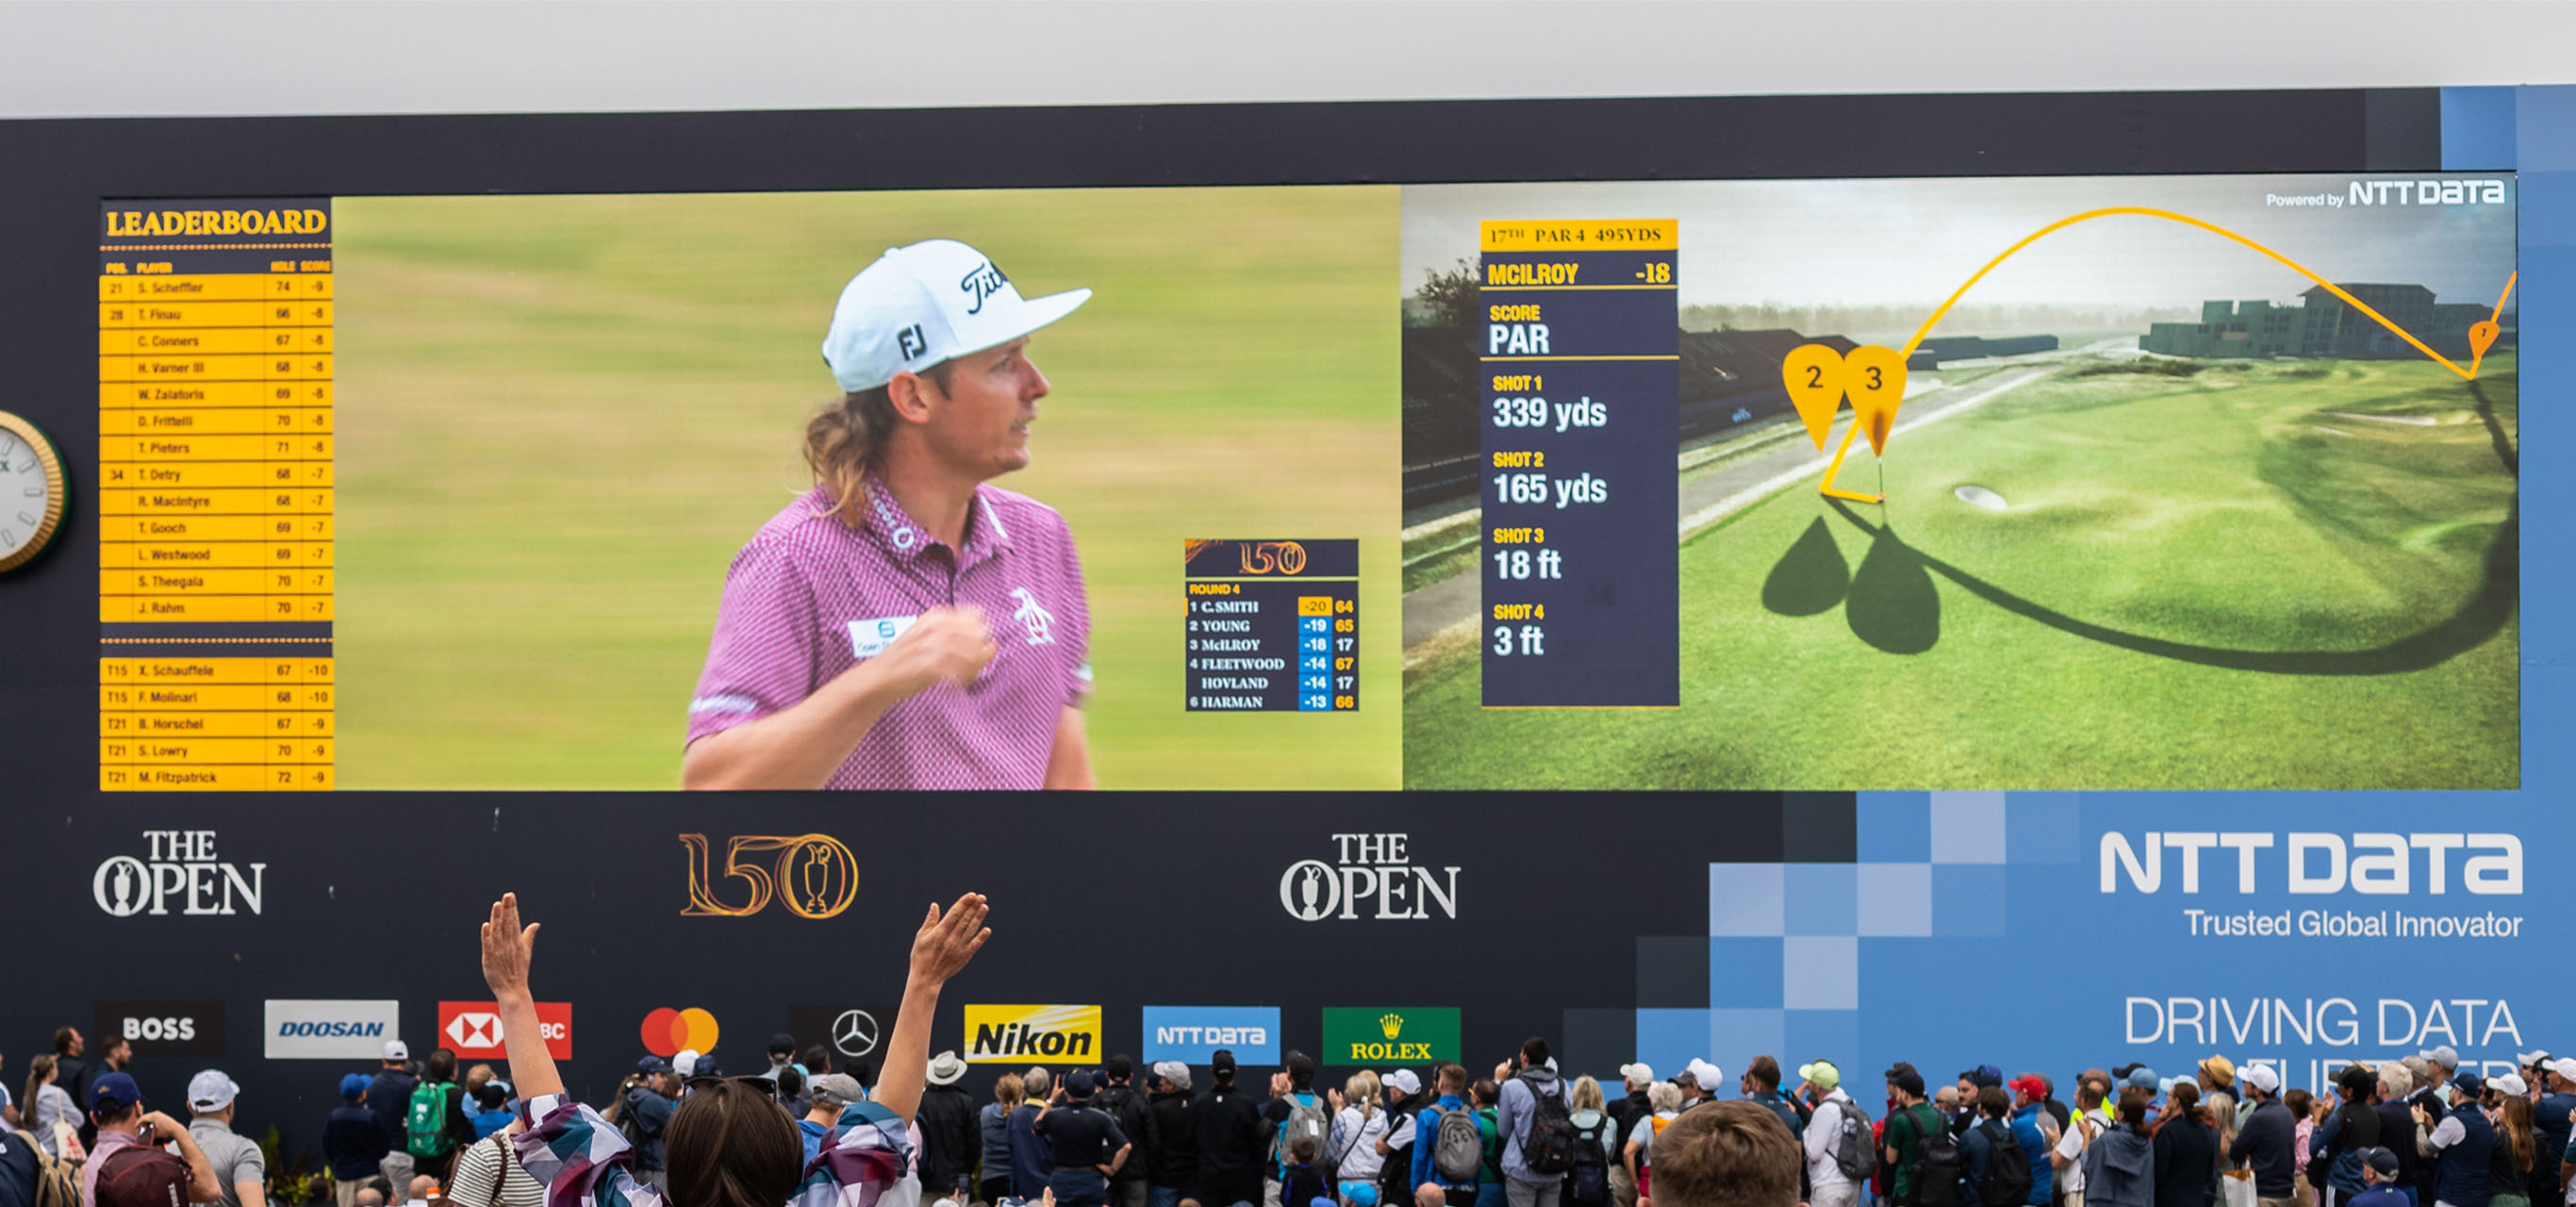 NTT DATA and Digital Twin Technology at The Open Championship: Redefining the Fan Experience